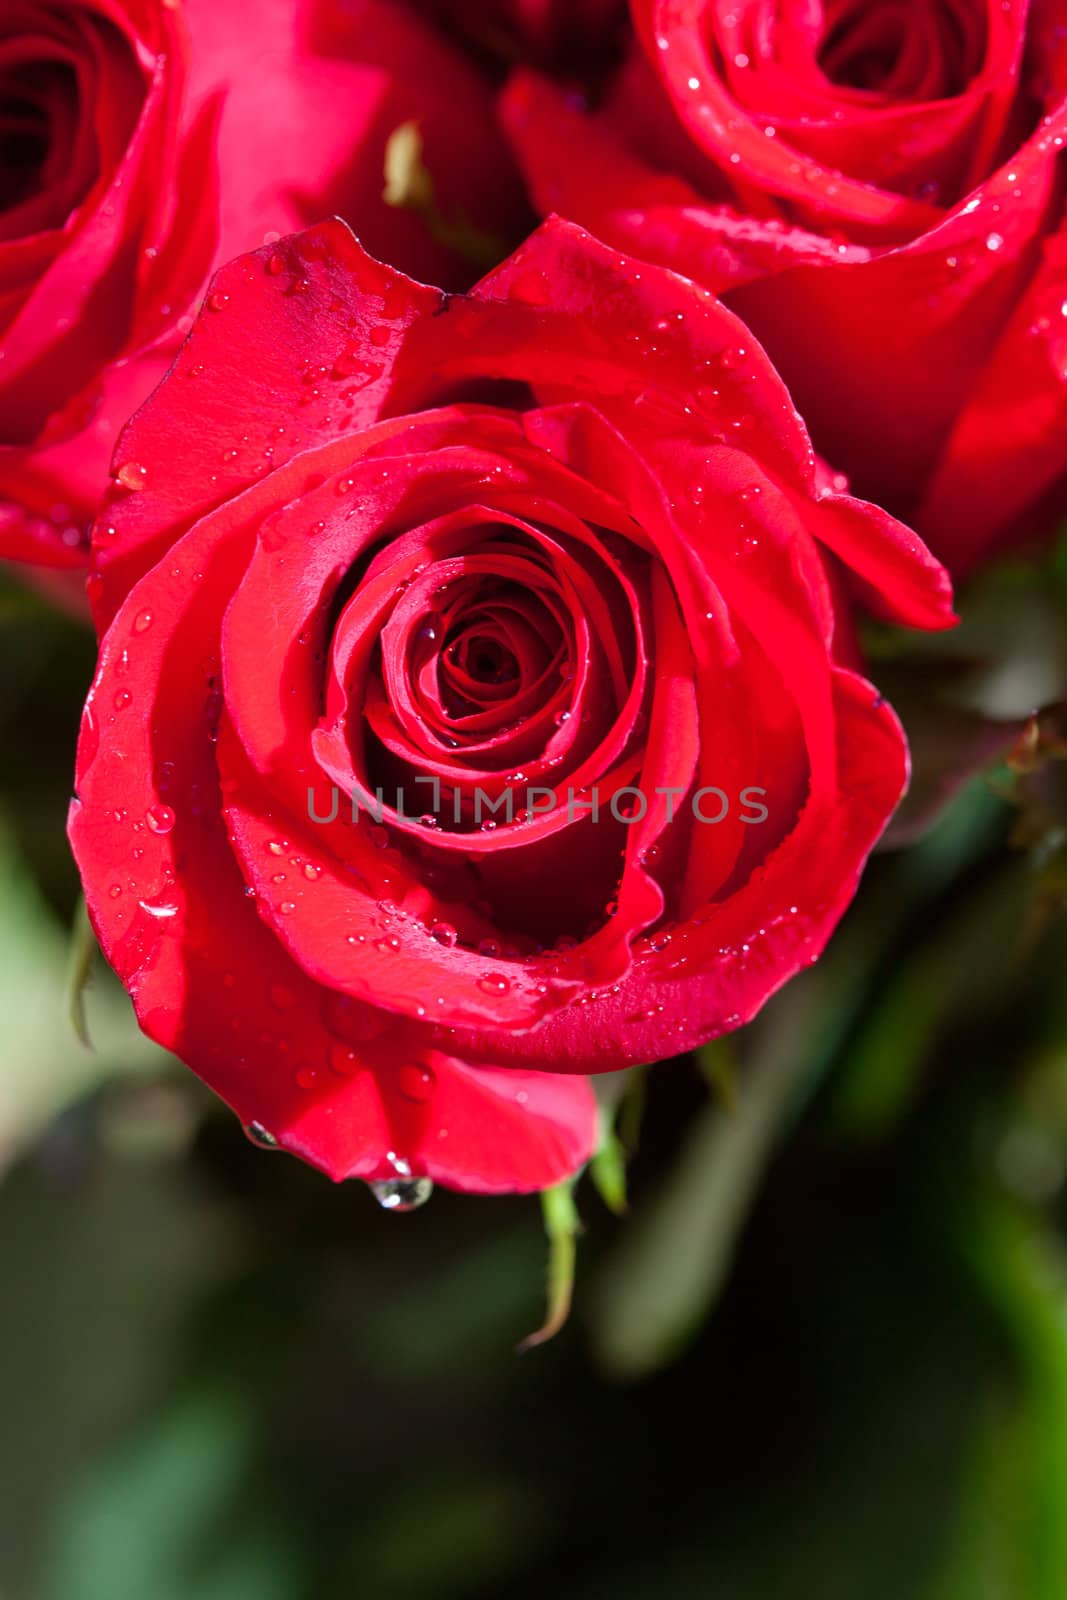 beautiful bouquet of red roses with water drops by jannyjus